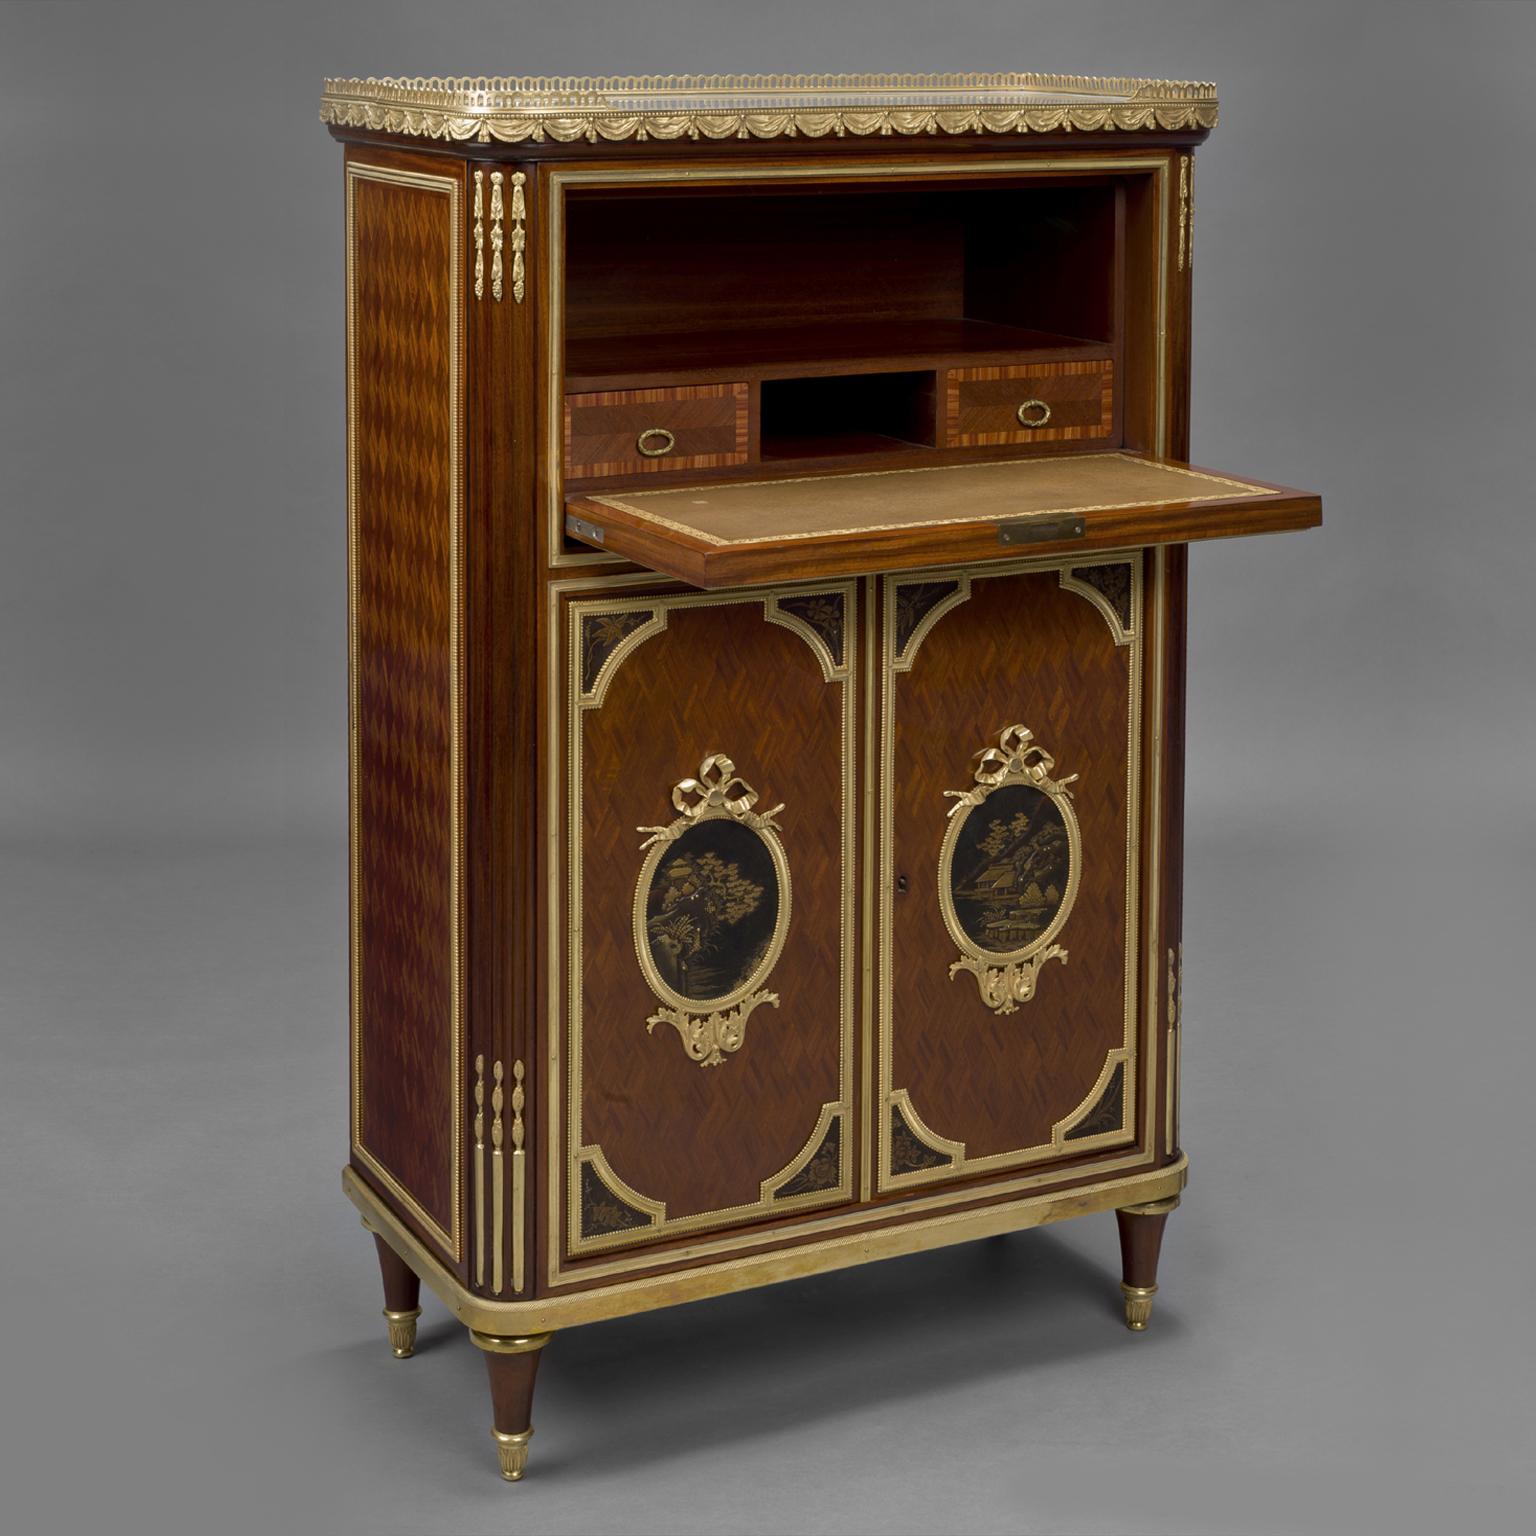 A Fine Louis XVI Style Parquetry, Gilt-Bronze and Lacquer Mounted Petit Secretaire Cabinet, Attributed to Maison Beurdeley. 

Stamped to the reverse of the bronze mounts to the bottom columns 'H.B. 47', stamped to the reverse of the bronze mounts to